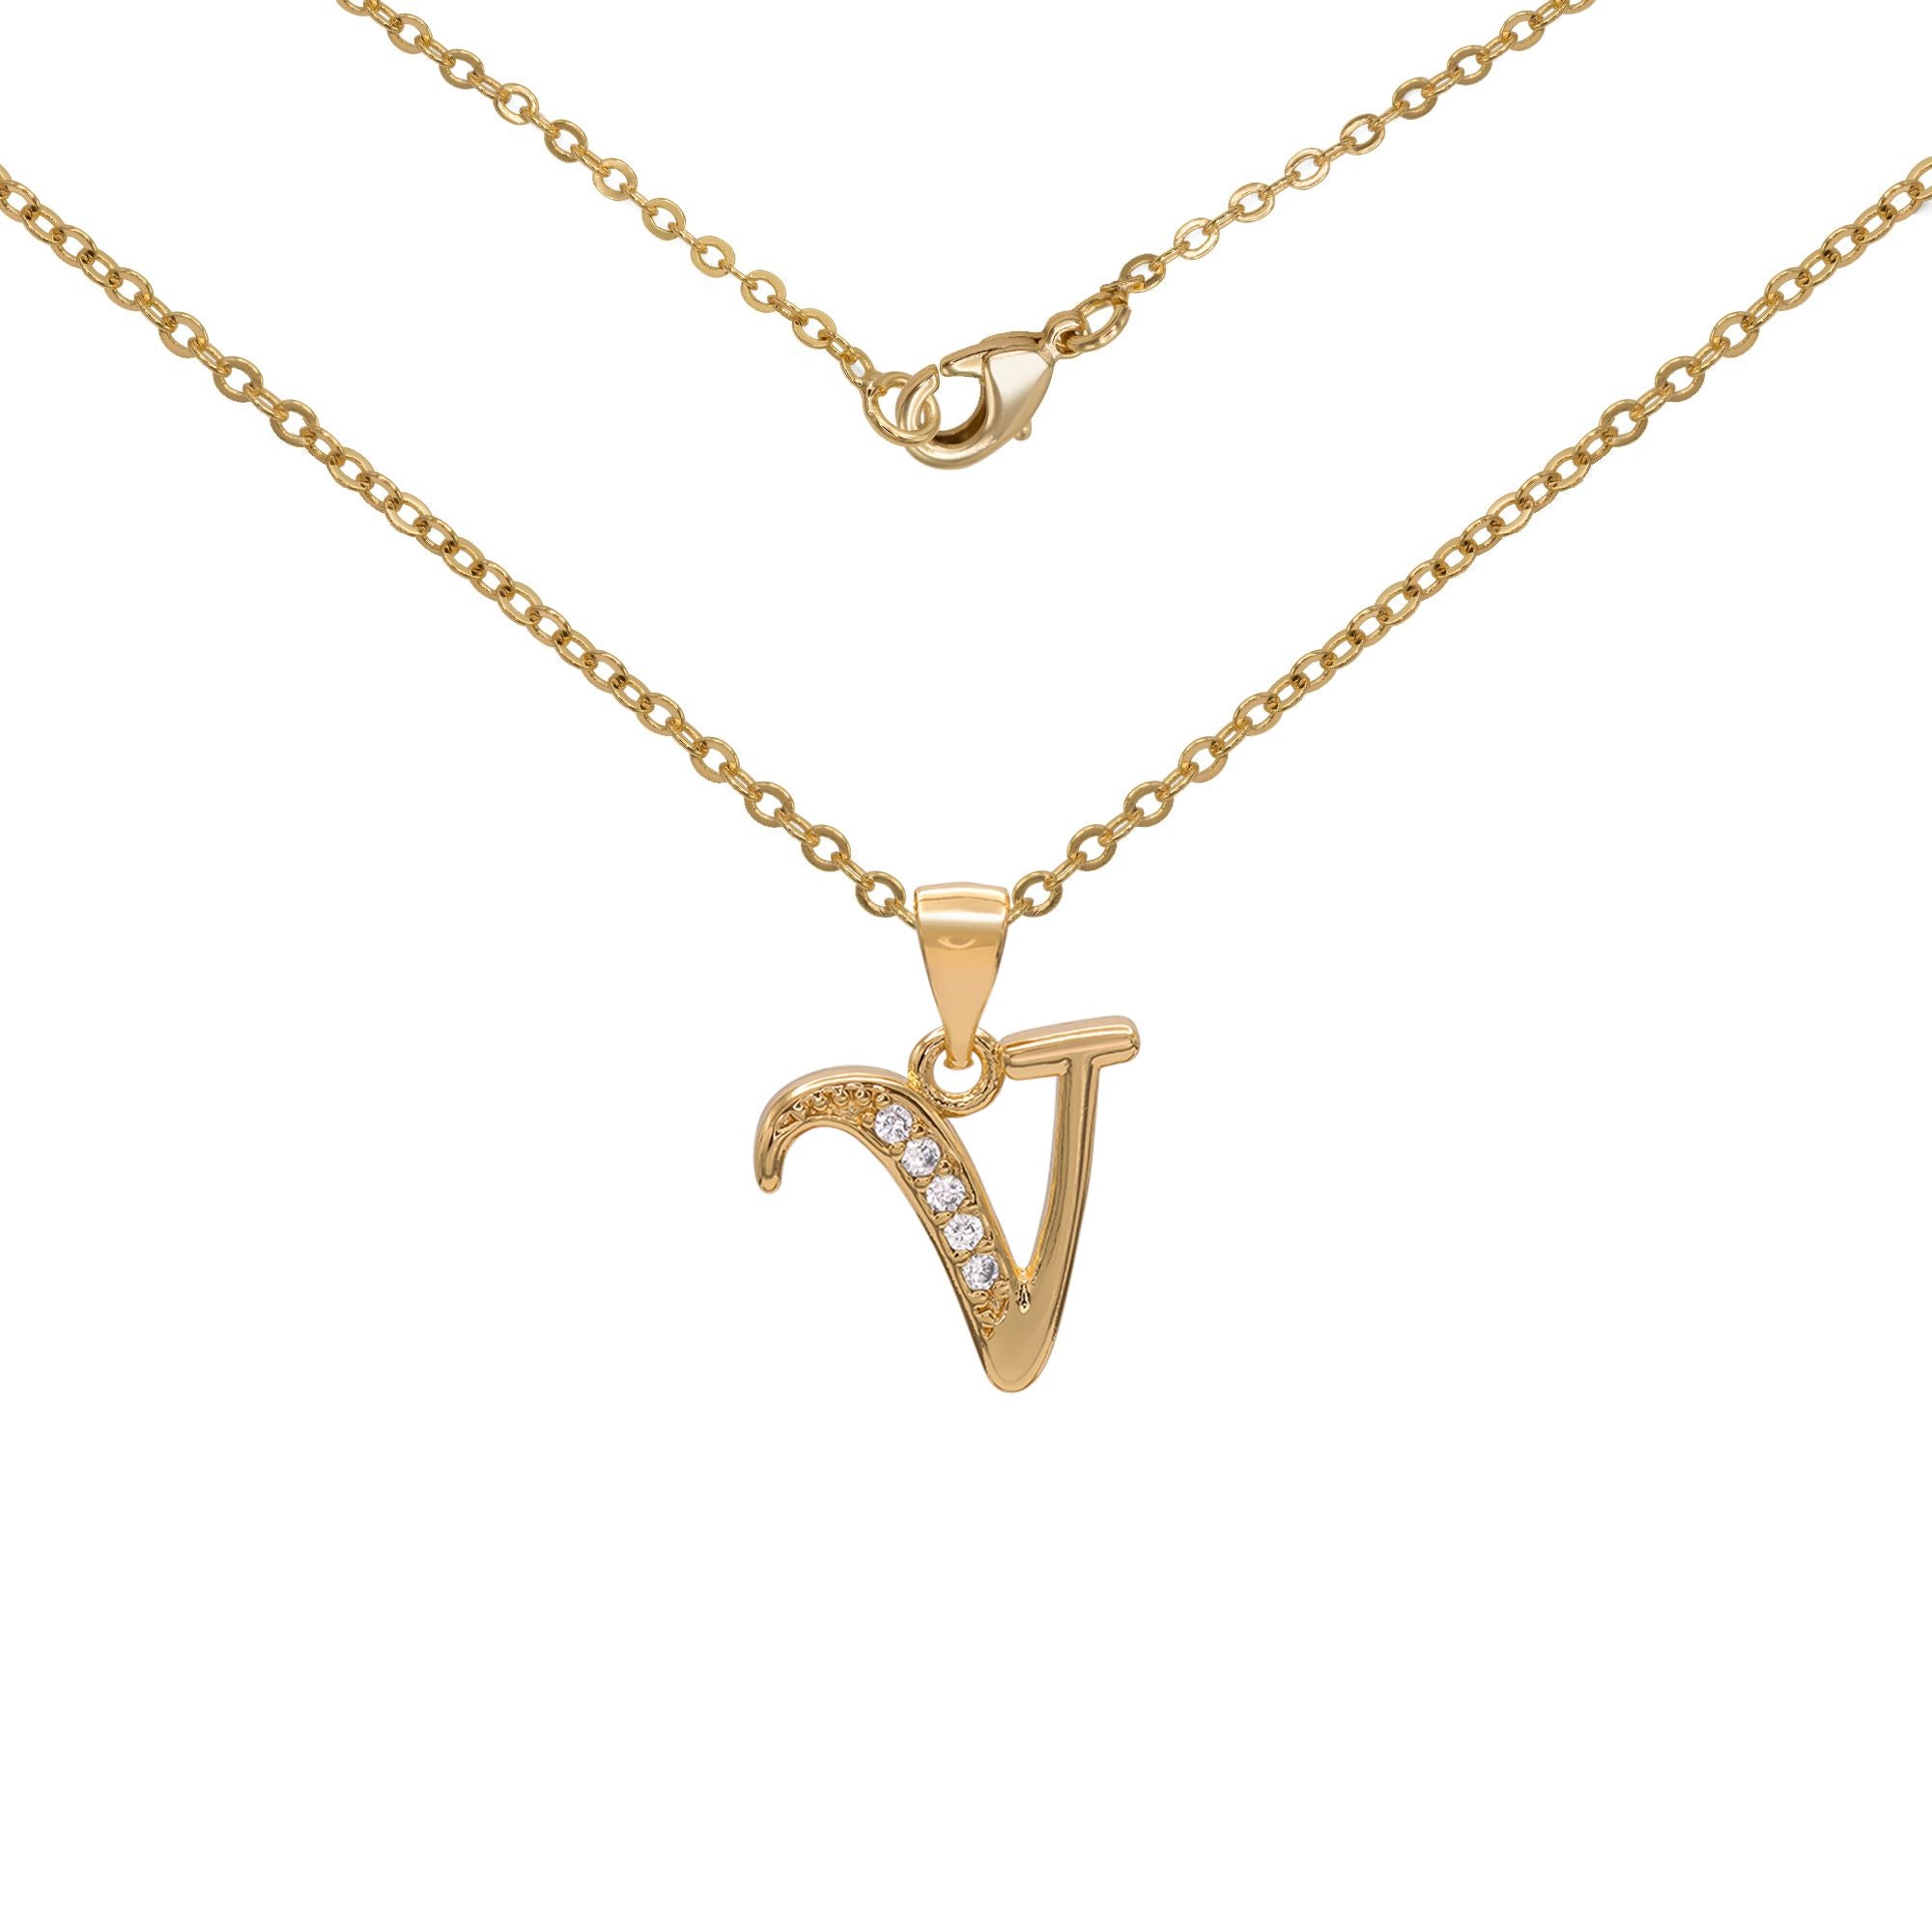 Initial Letter Pendant With Cubic Zirconia 18K Gold Filled Alphabet CZ Charm Rolo Chain Set 18" Necklace Women Girl Teen